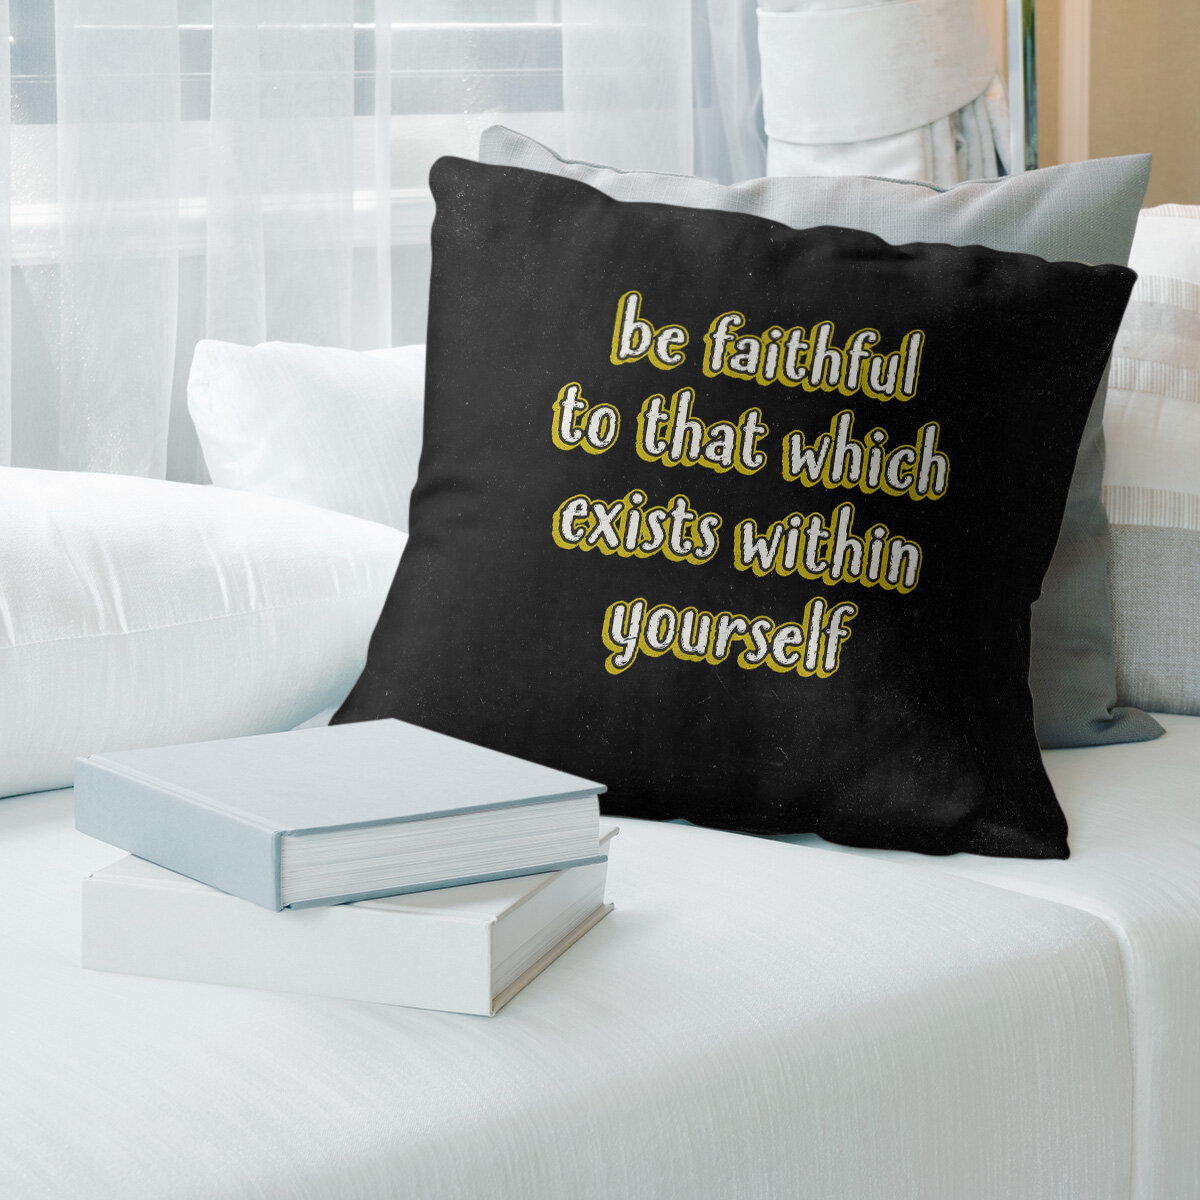 Inspirational Quotes Pillow Covers The More You Read The More Things You Know Book Lover Cotton Linen Throw Pillow Case Cushion Libary Book Lover Sofa Couch Bed Decor Living Room Decorative 18 x 18